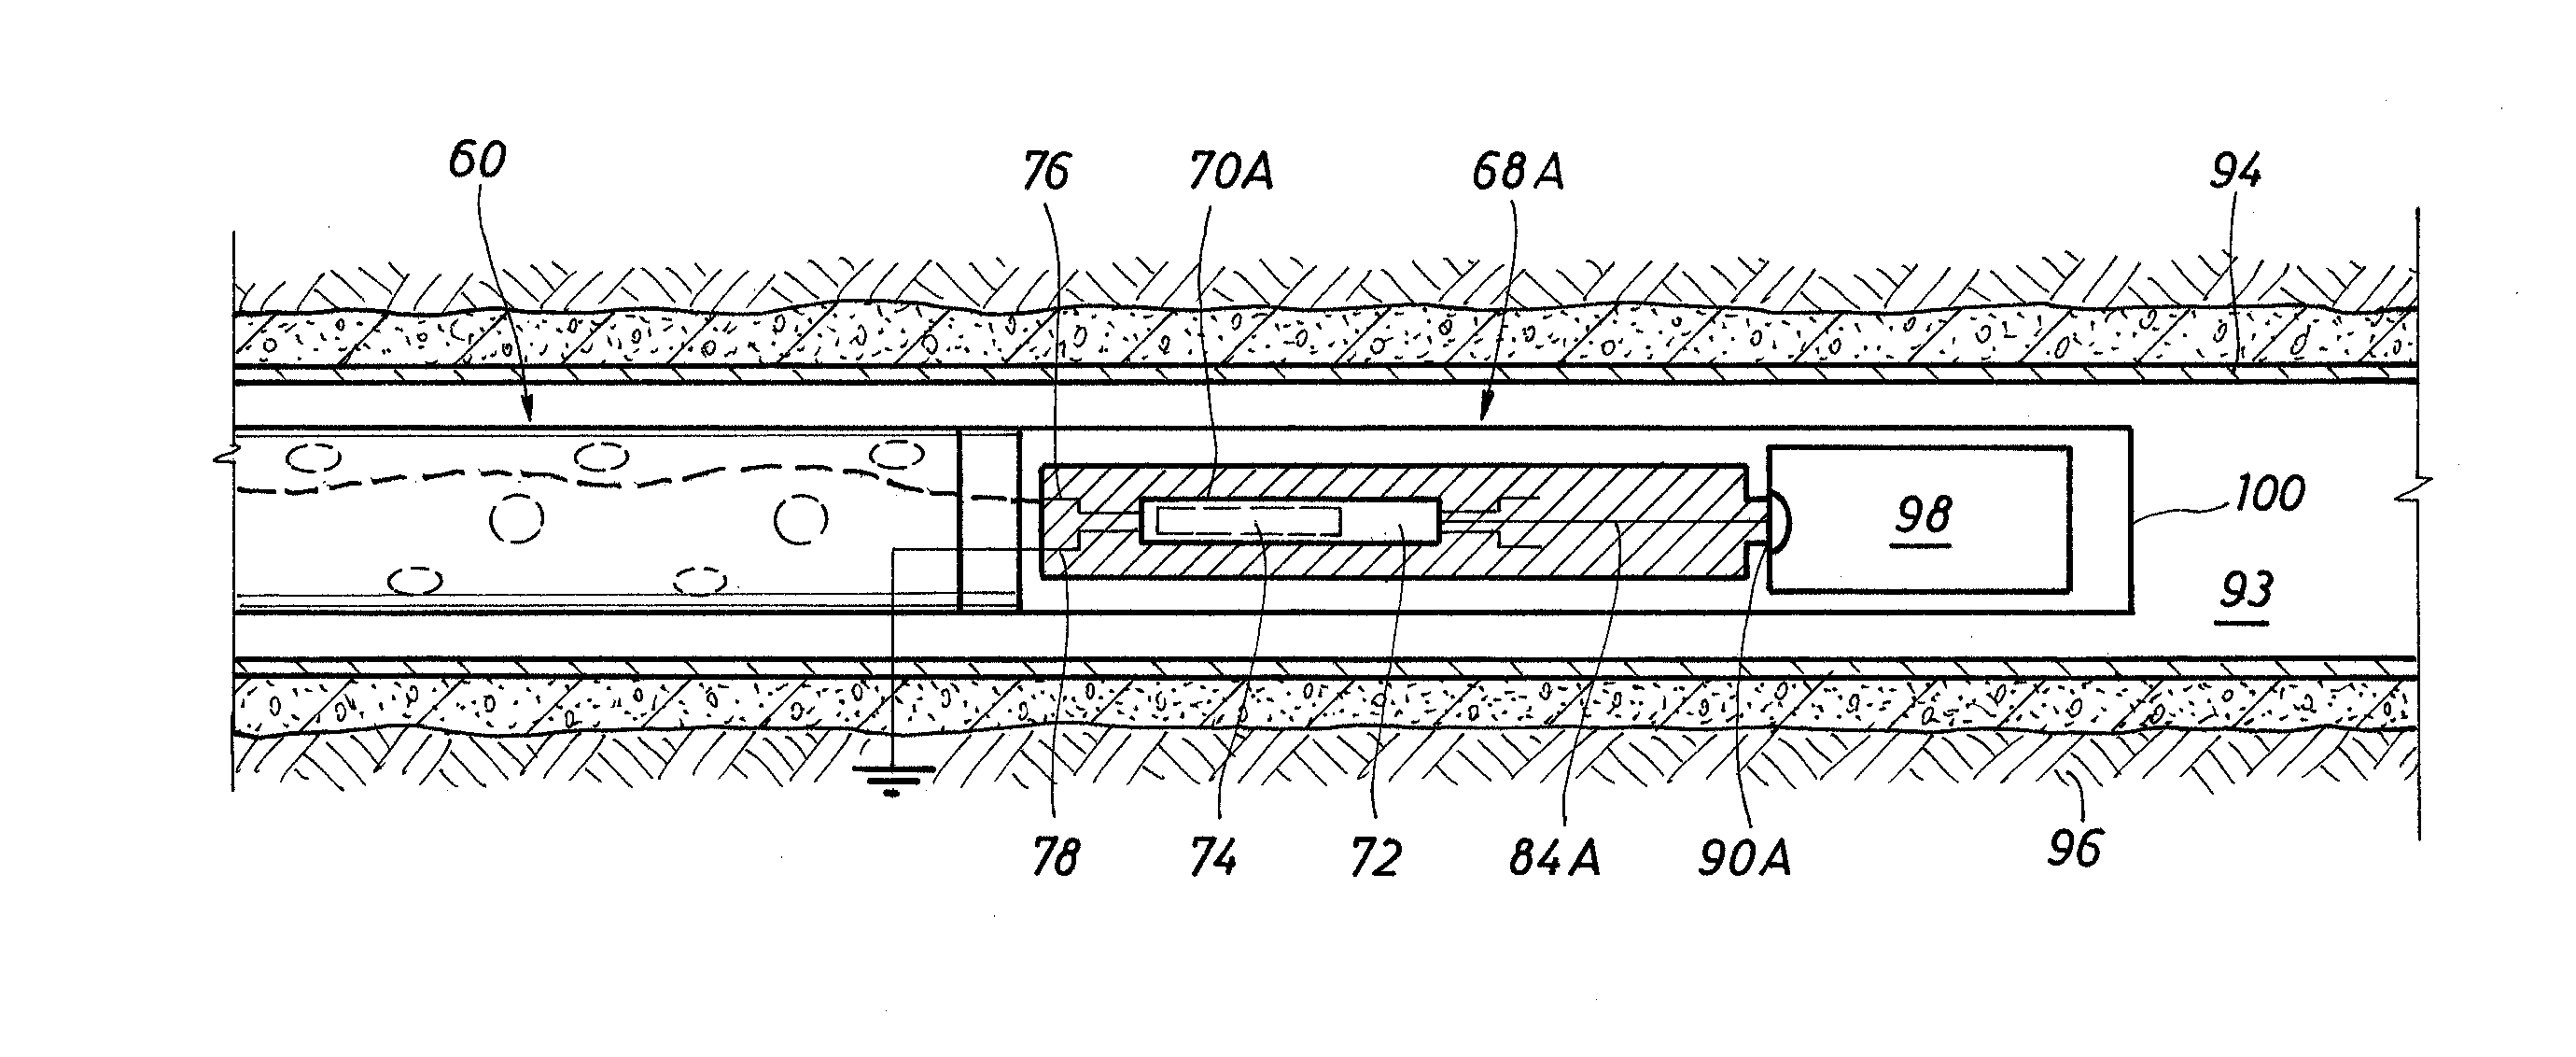 Connection cartridge for downhole string